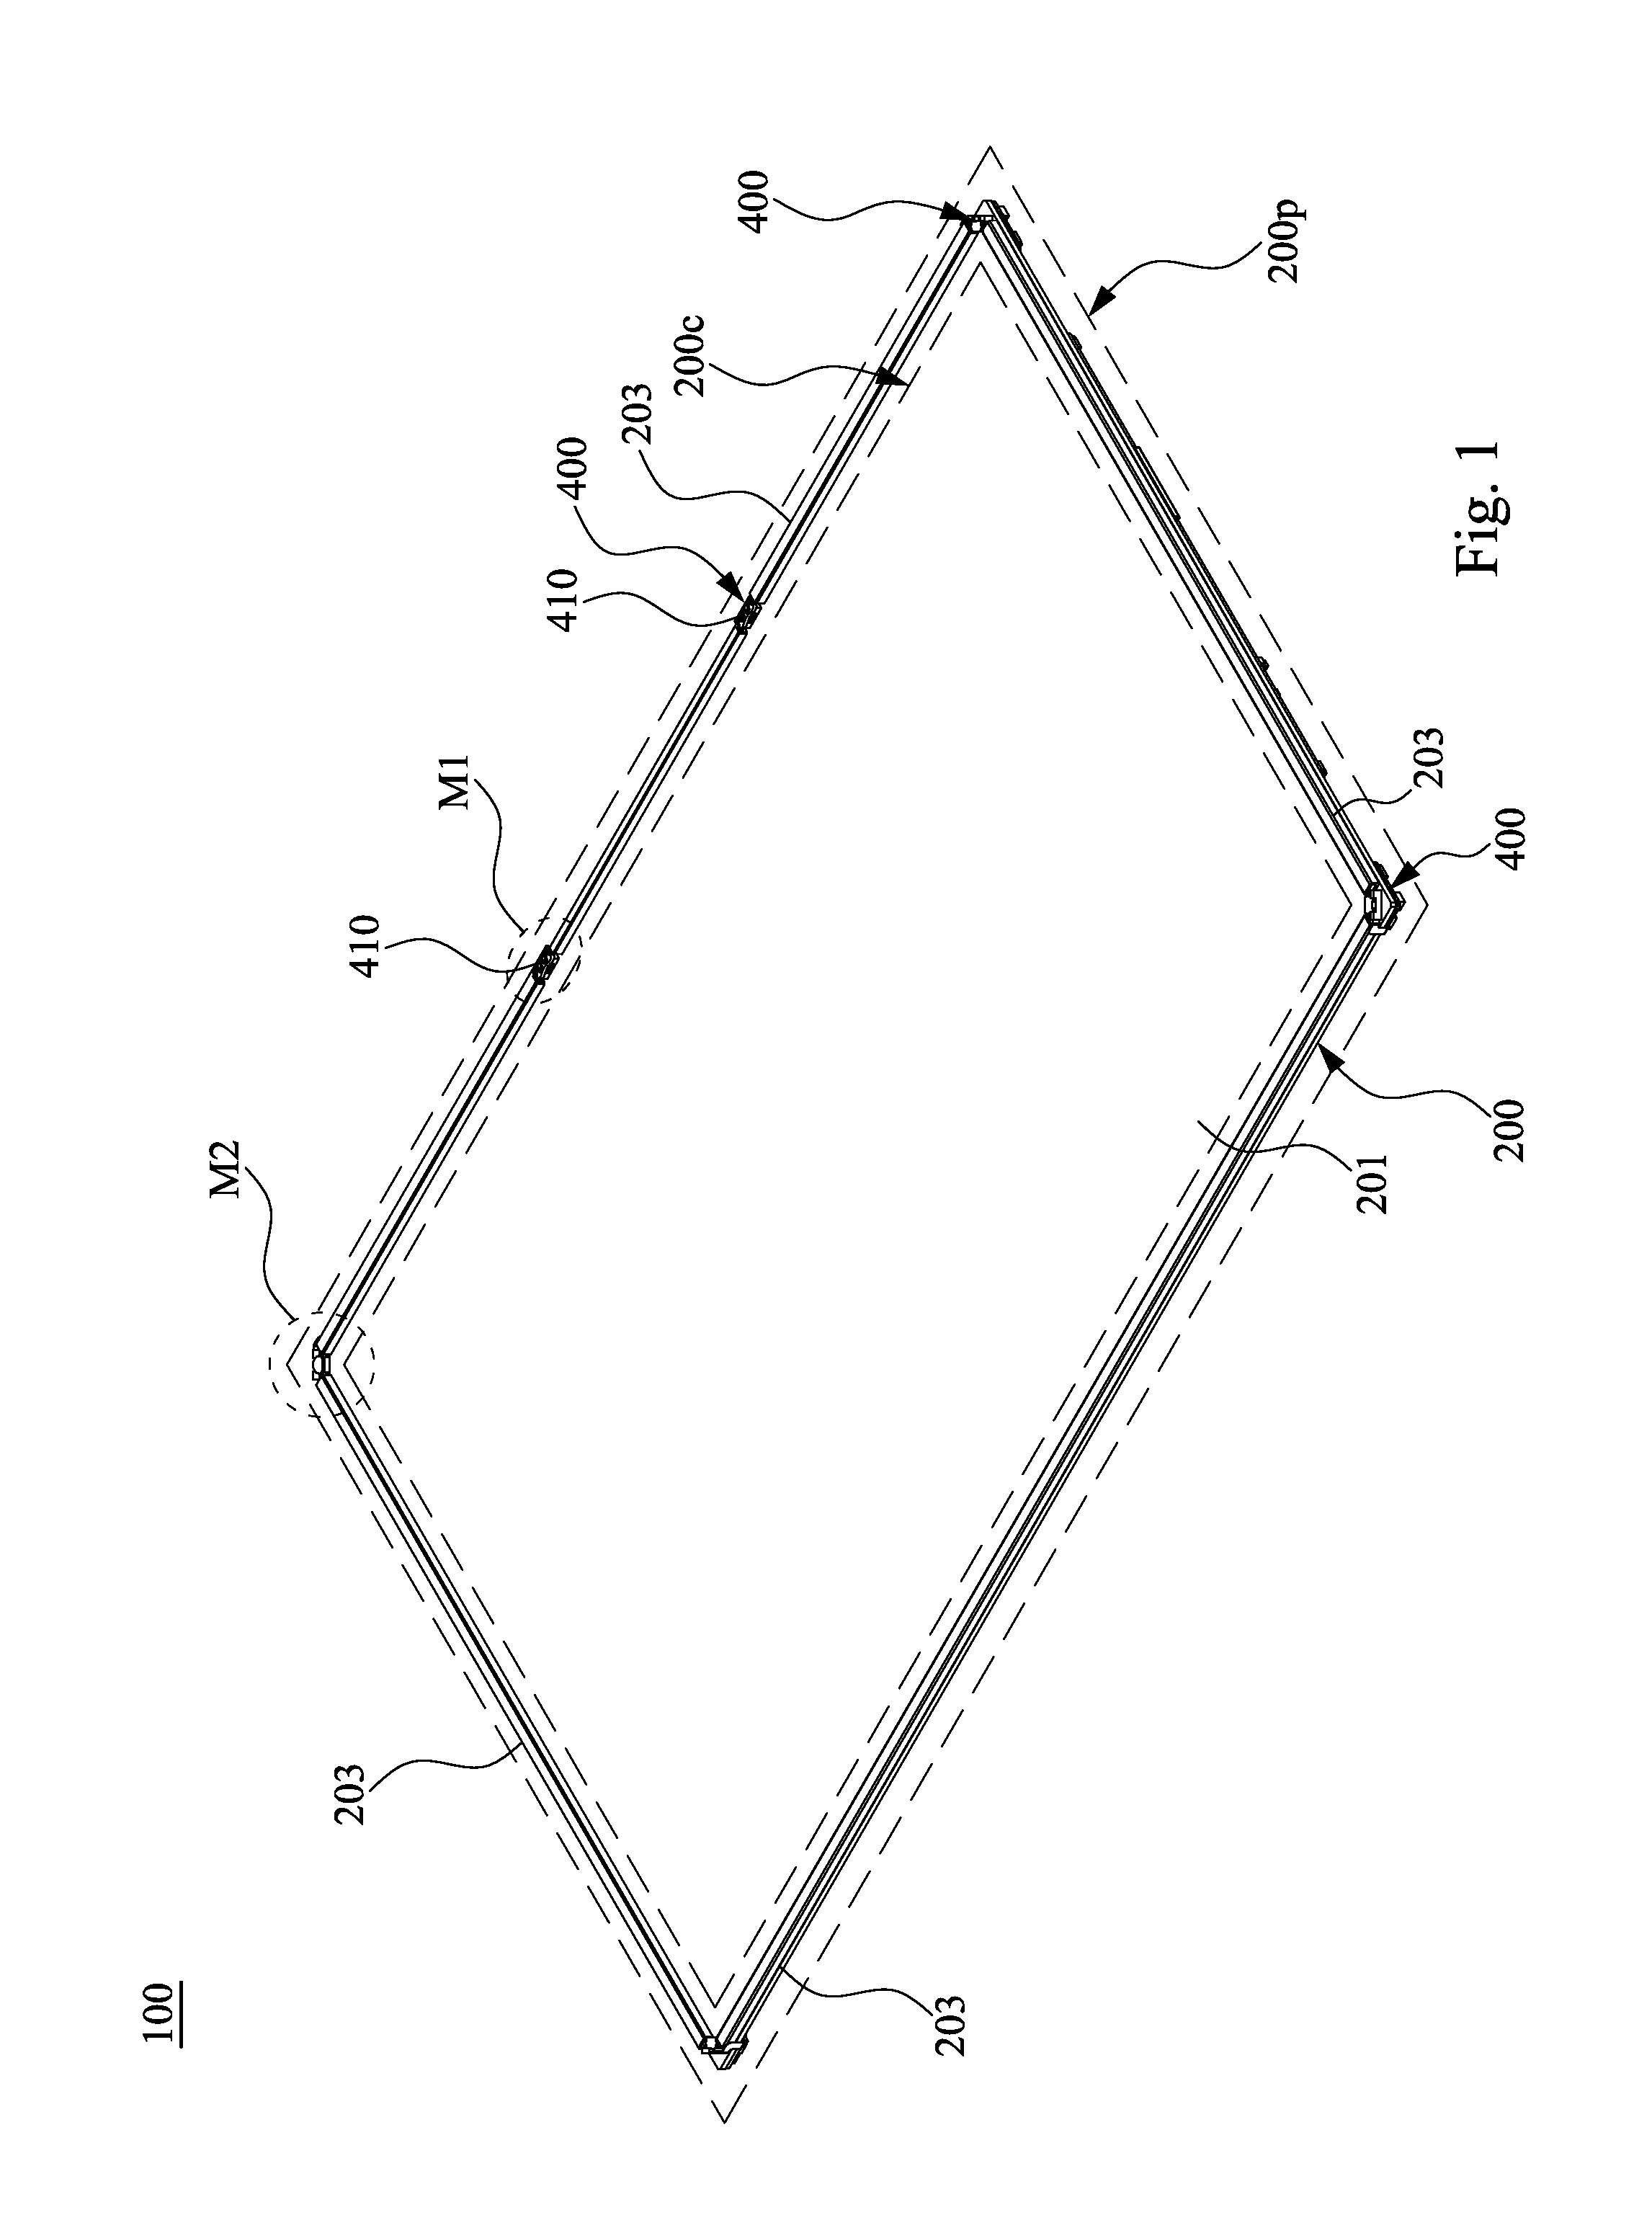 Optical multi-touch device and its optical touch module